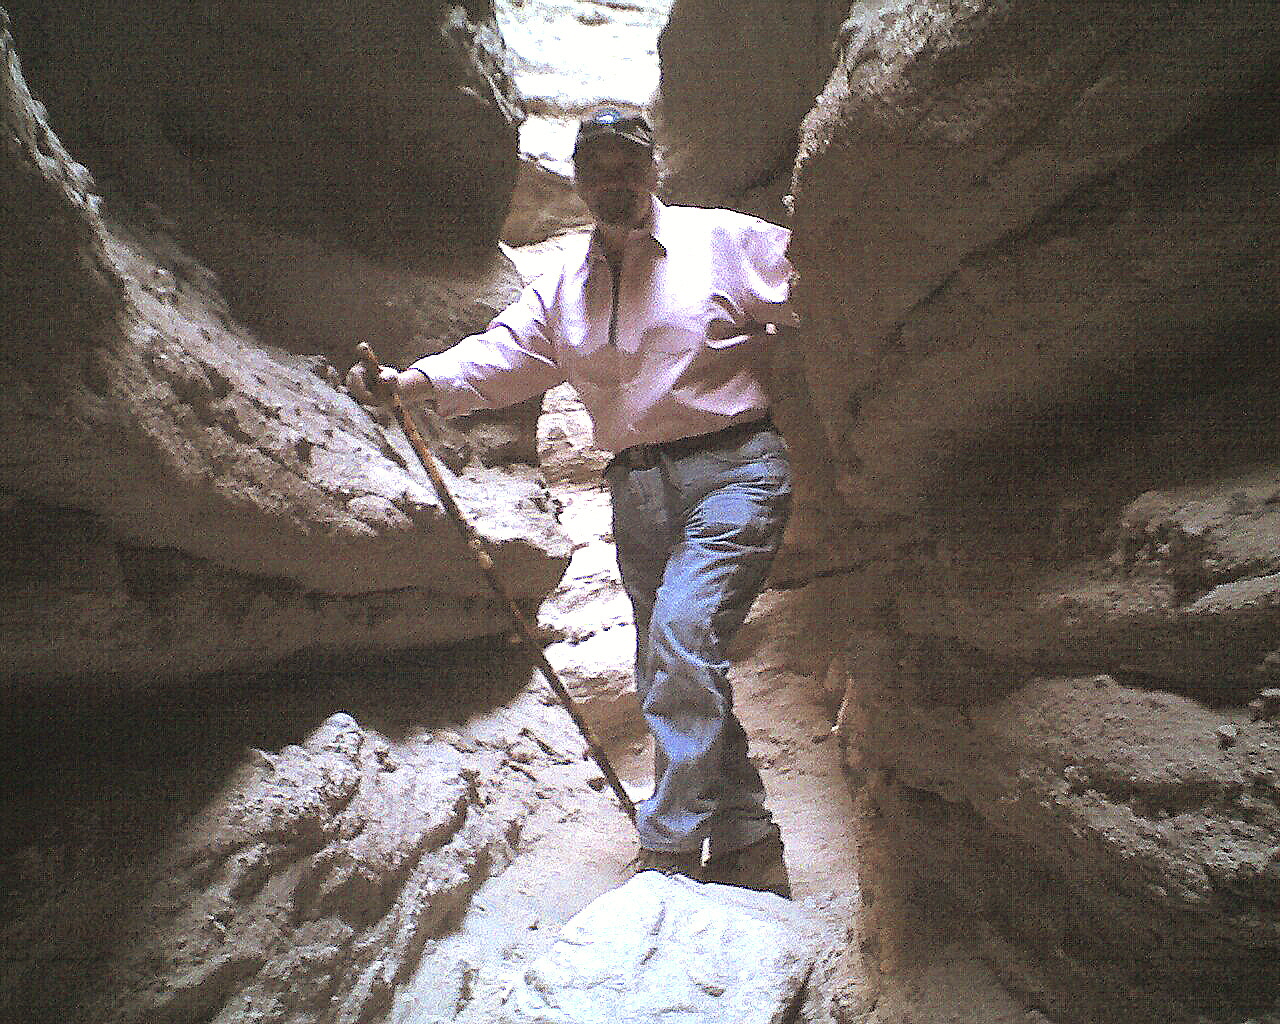 Emile, Ladders Trail, Slot and Painted Canyon, Mecca, CA